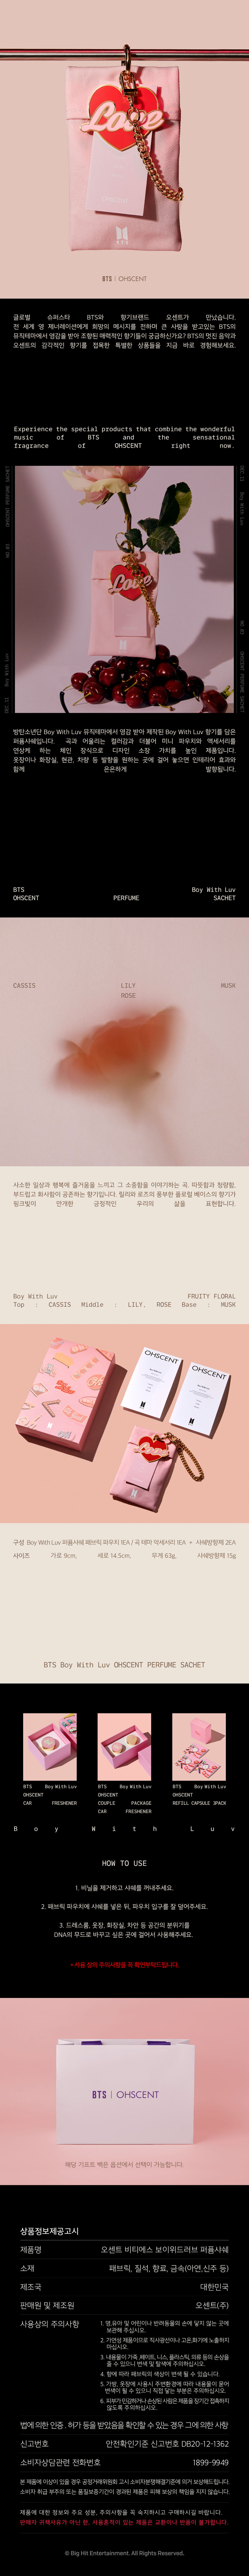 BTS20Boy20With20Luv20OHSCENT20PERFUME20SACHET.png (1000×10352)